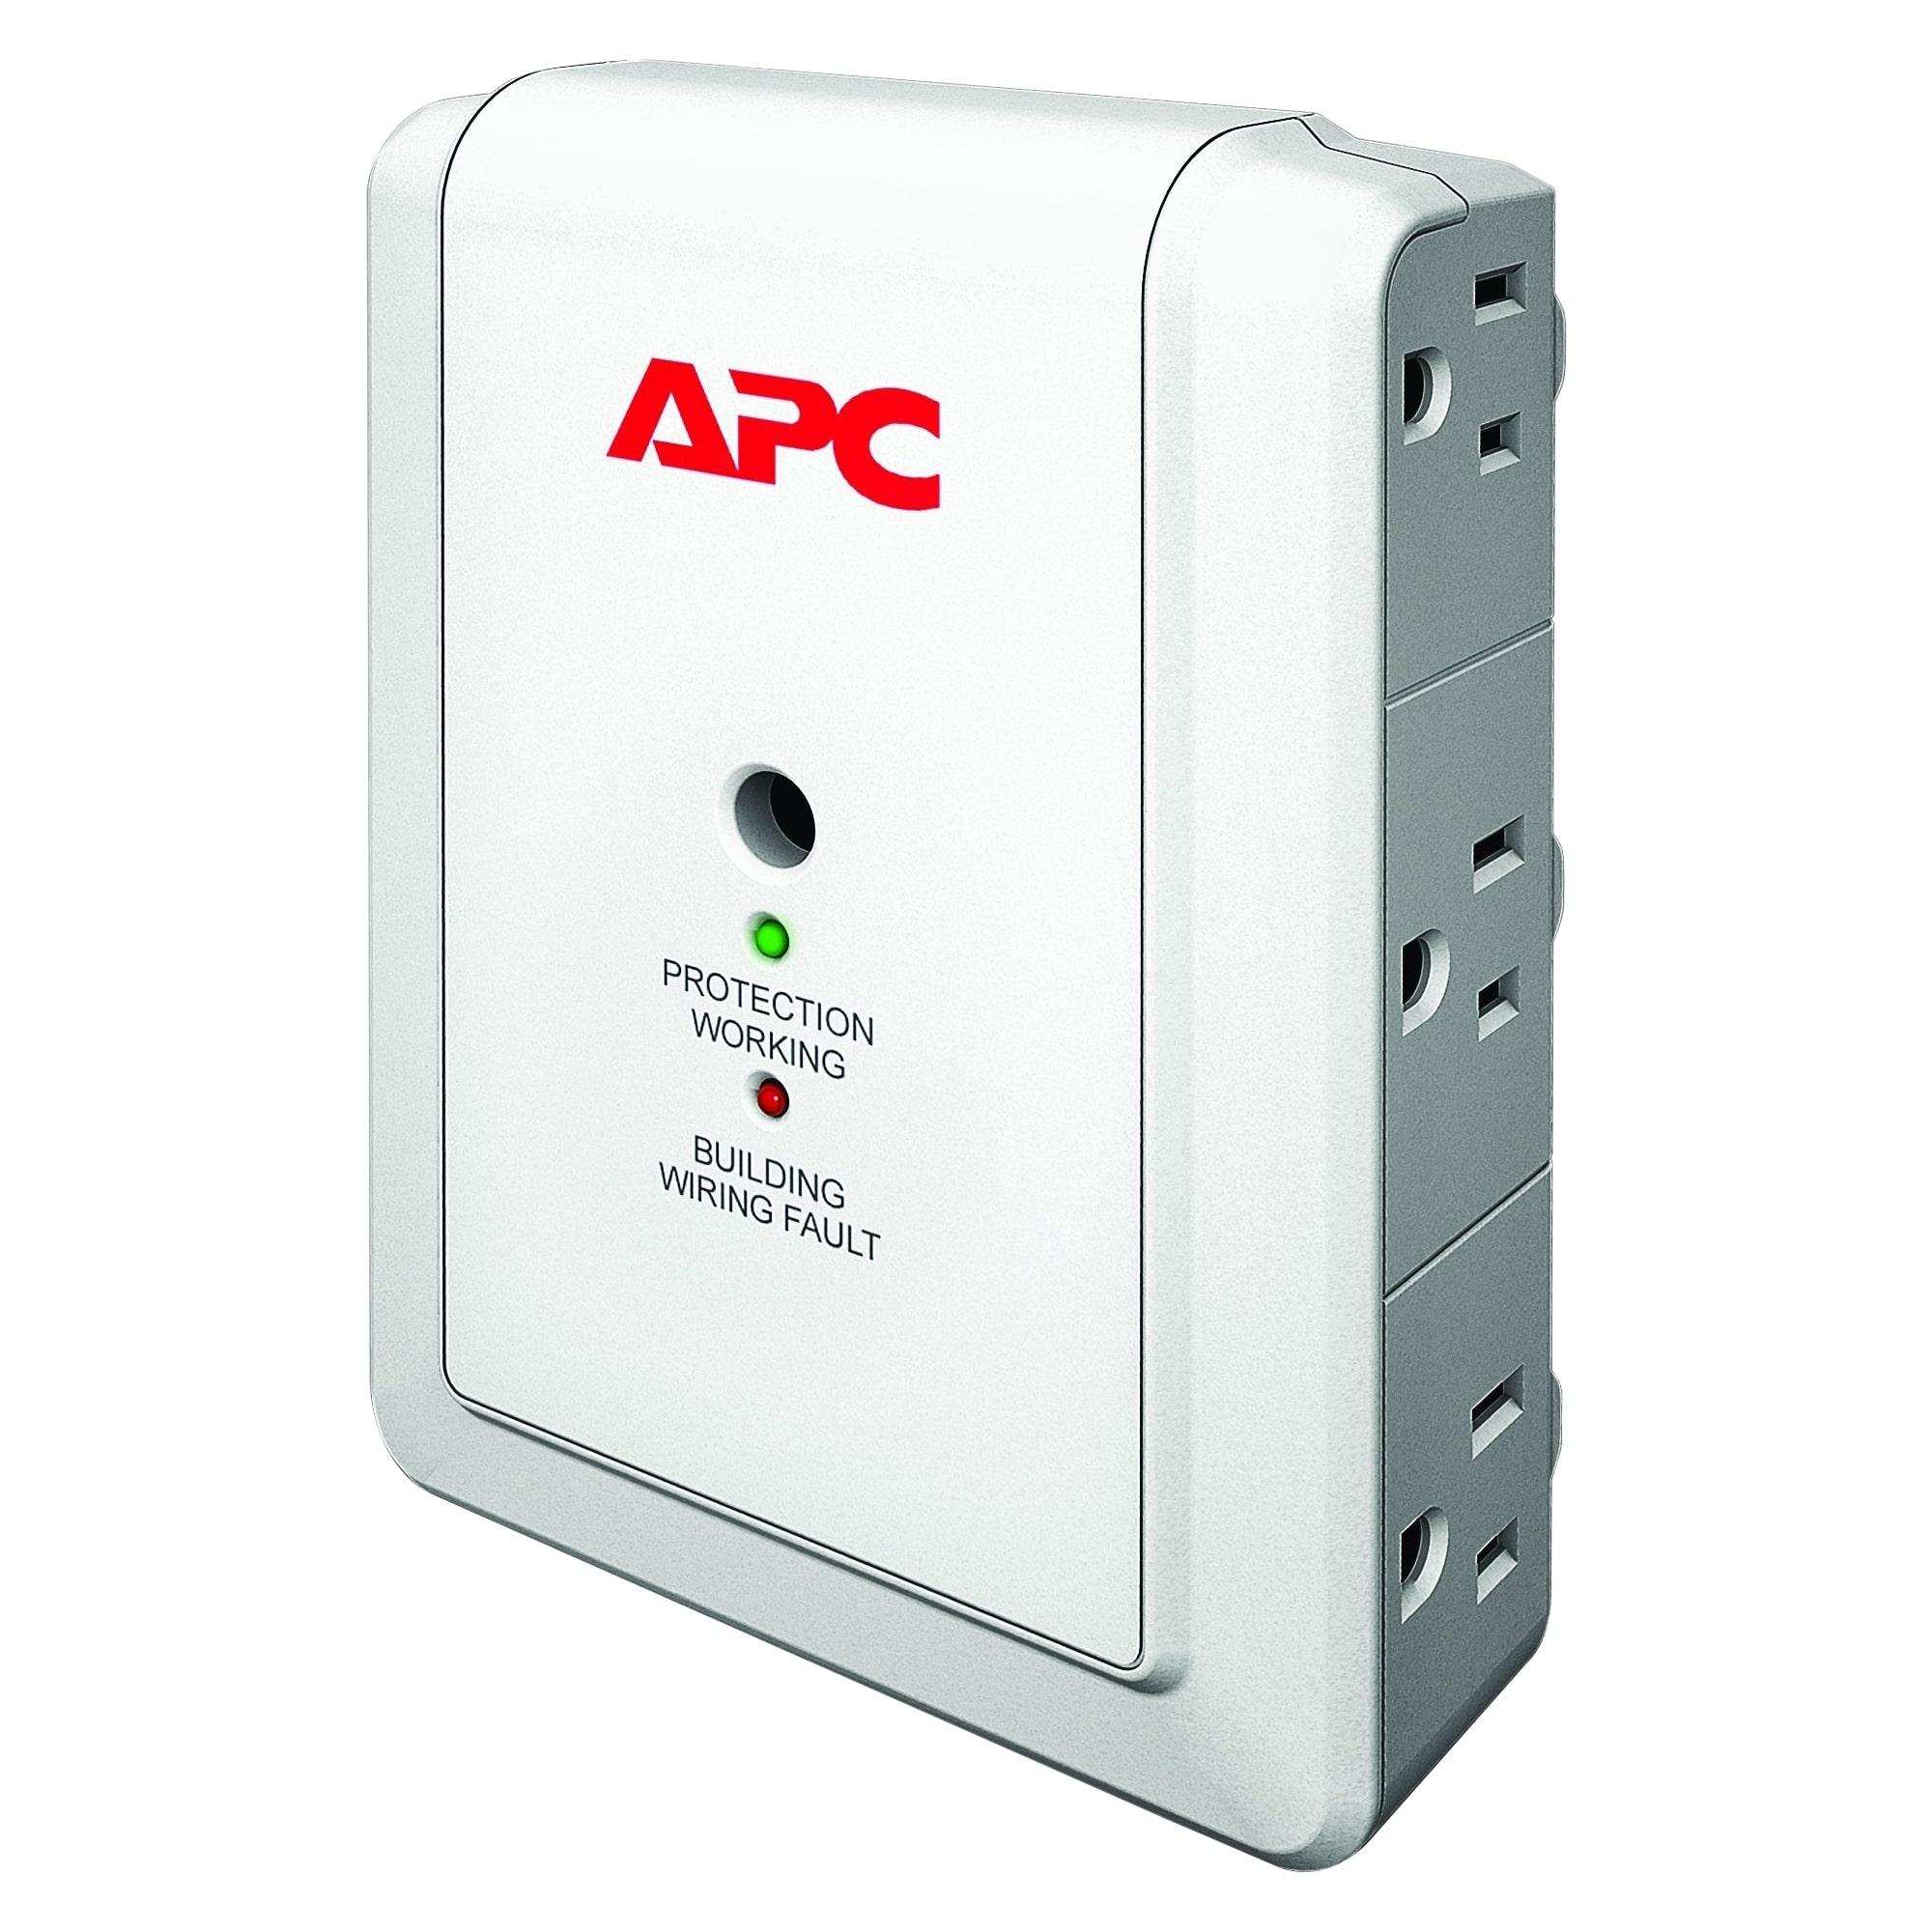 APC SurgeArrest 6-Outlet 1080 Joules Wall Mount Surge Protector for $6.99 Shipped